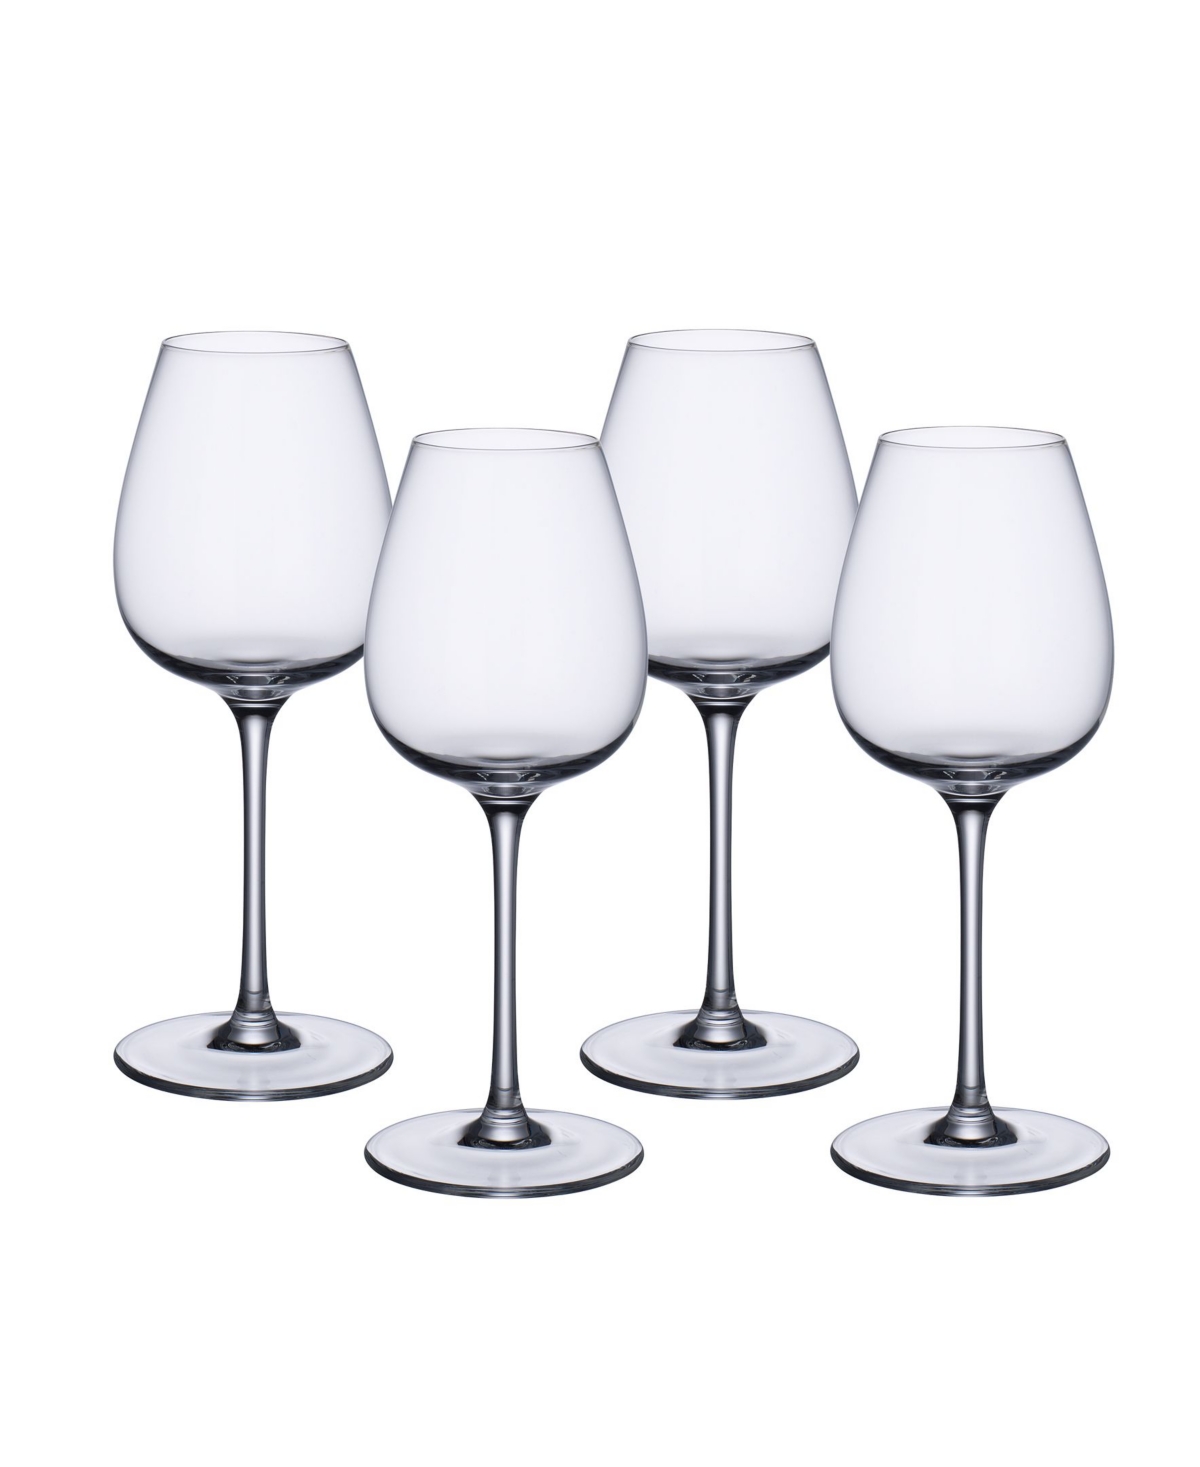 Villeroy & Boch Purismo Red Wine Intricate and Delicate Glass, Set of 4